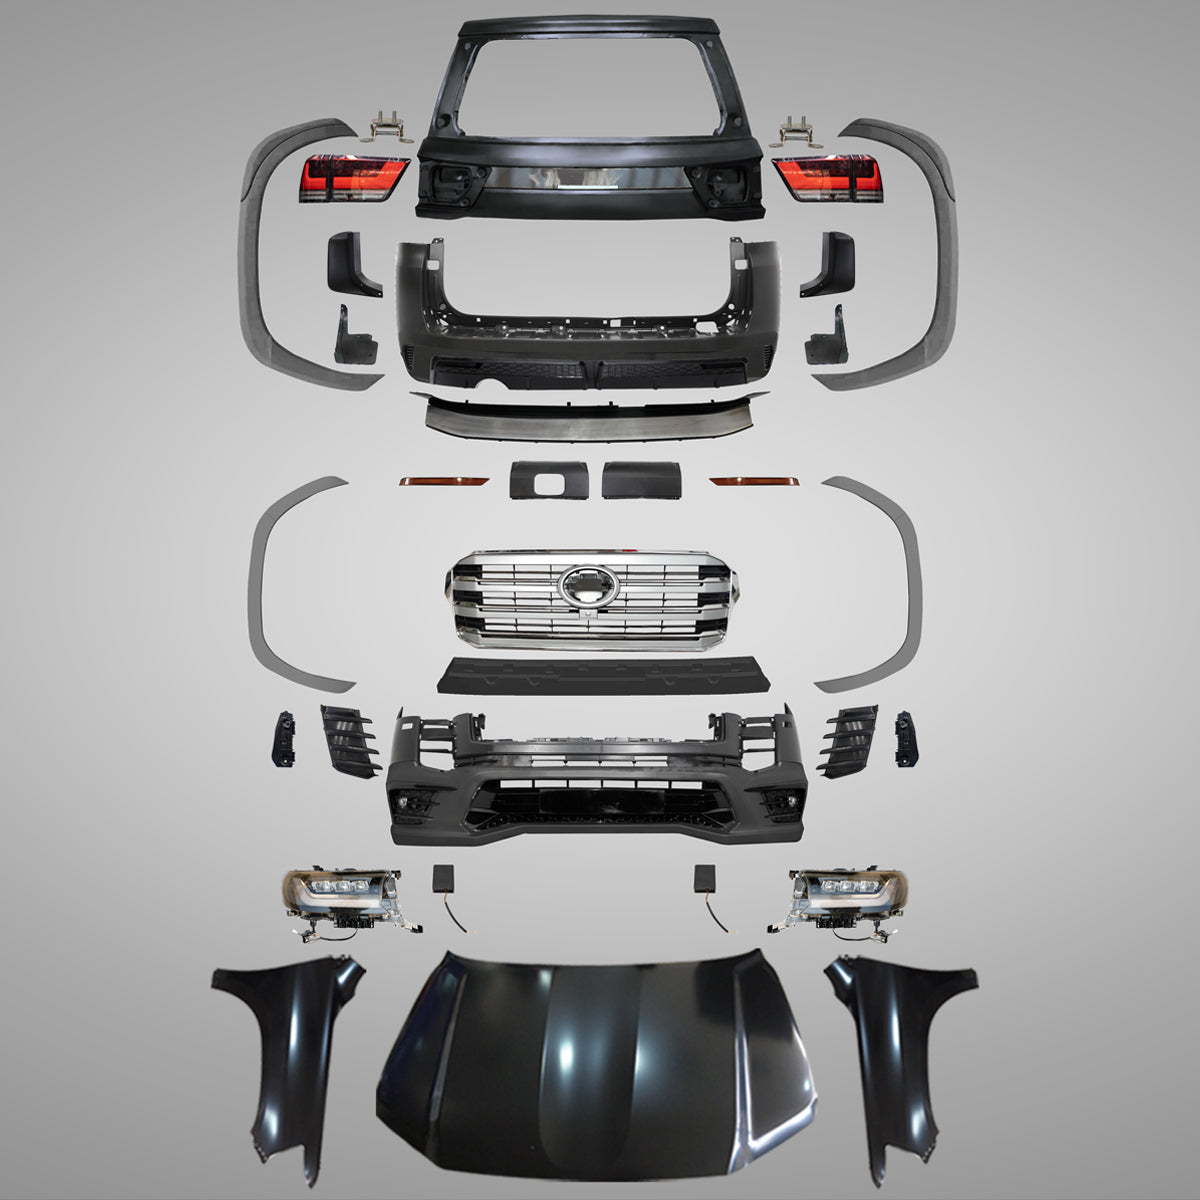 THE BODY KIT FOR LAND CRUISER LC200 2008-2021 UPGRADE TO LC300 2022 HIGH PROFILE